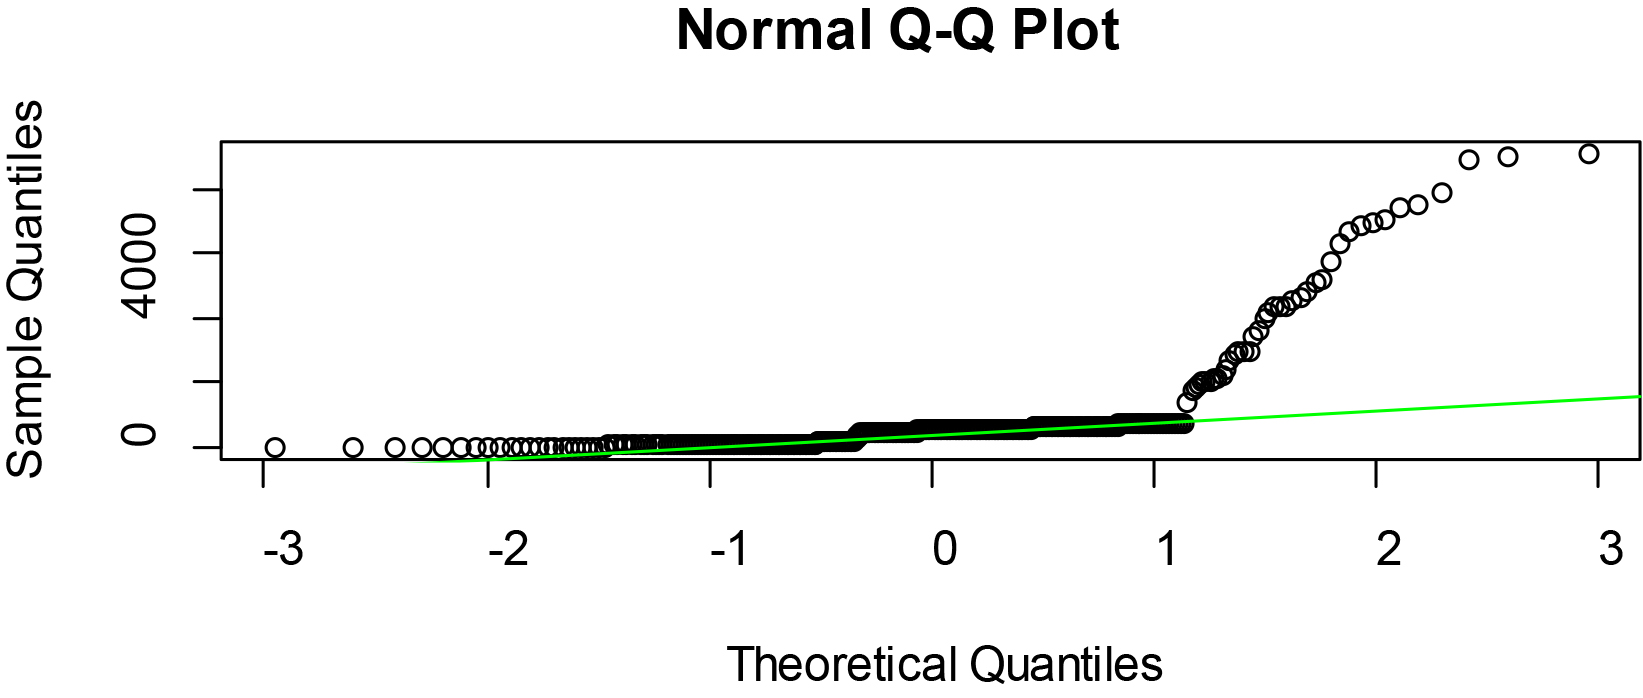 Normal Q-Q plots of ER of some selected West African countries.